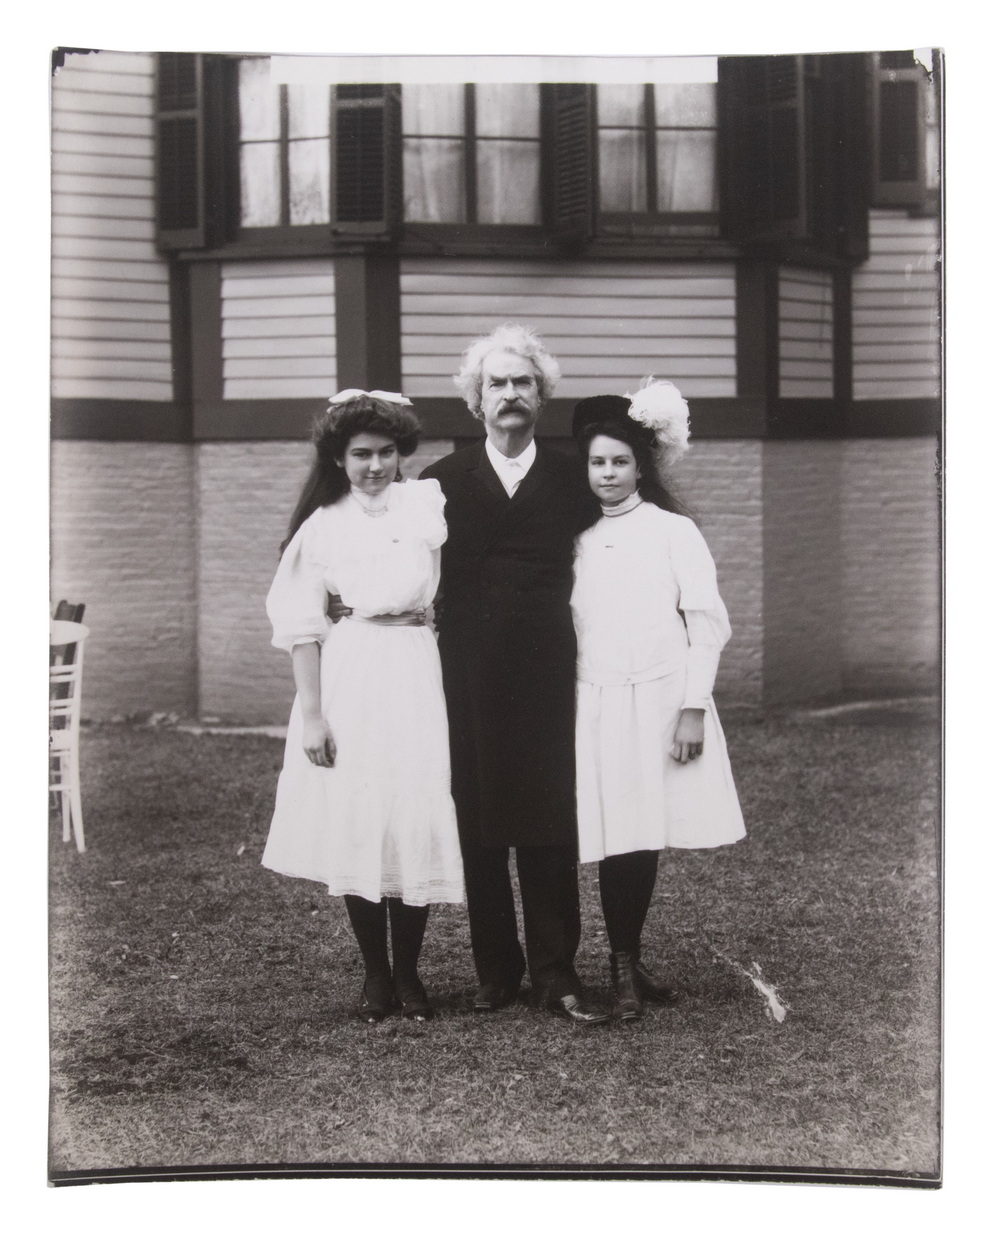 PACH BROS PHOTO OF MARK TWAIN WITH